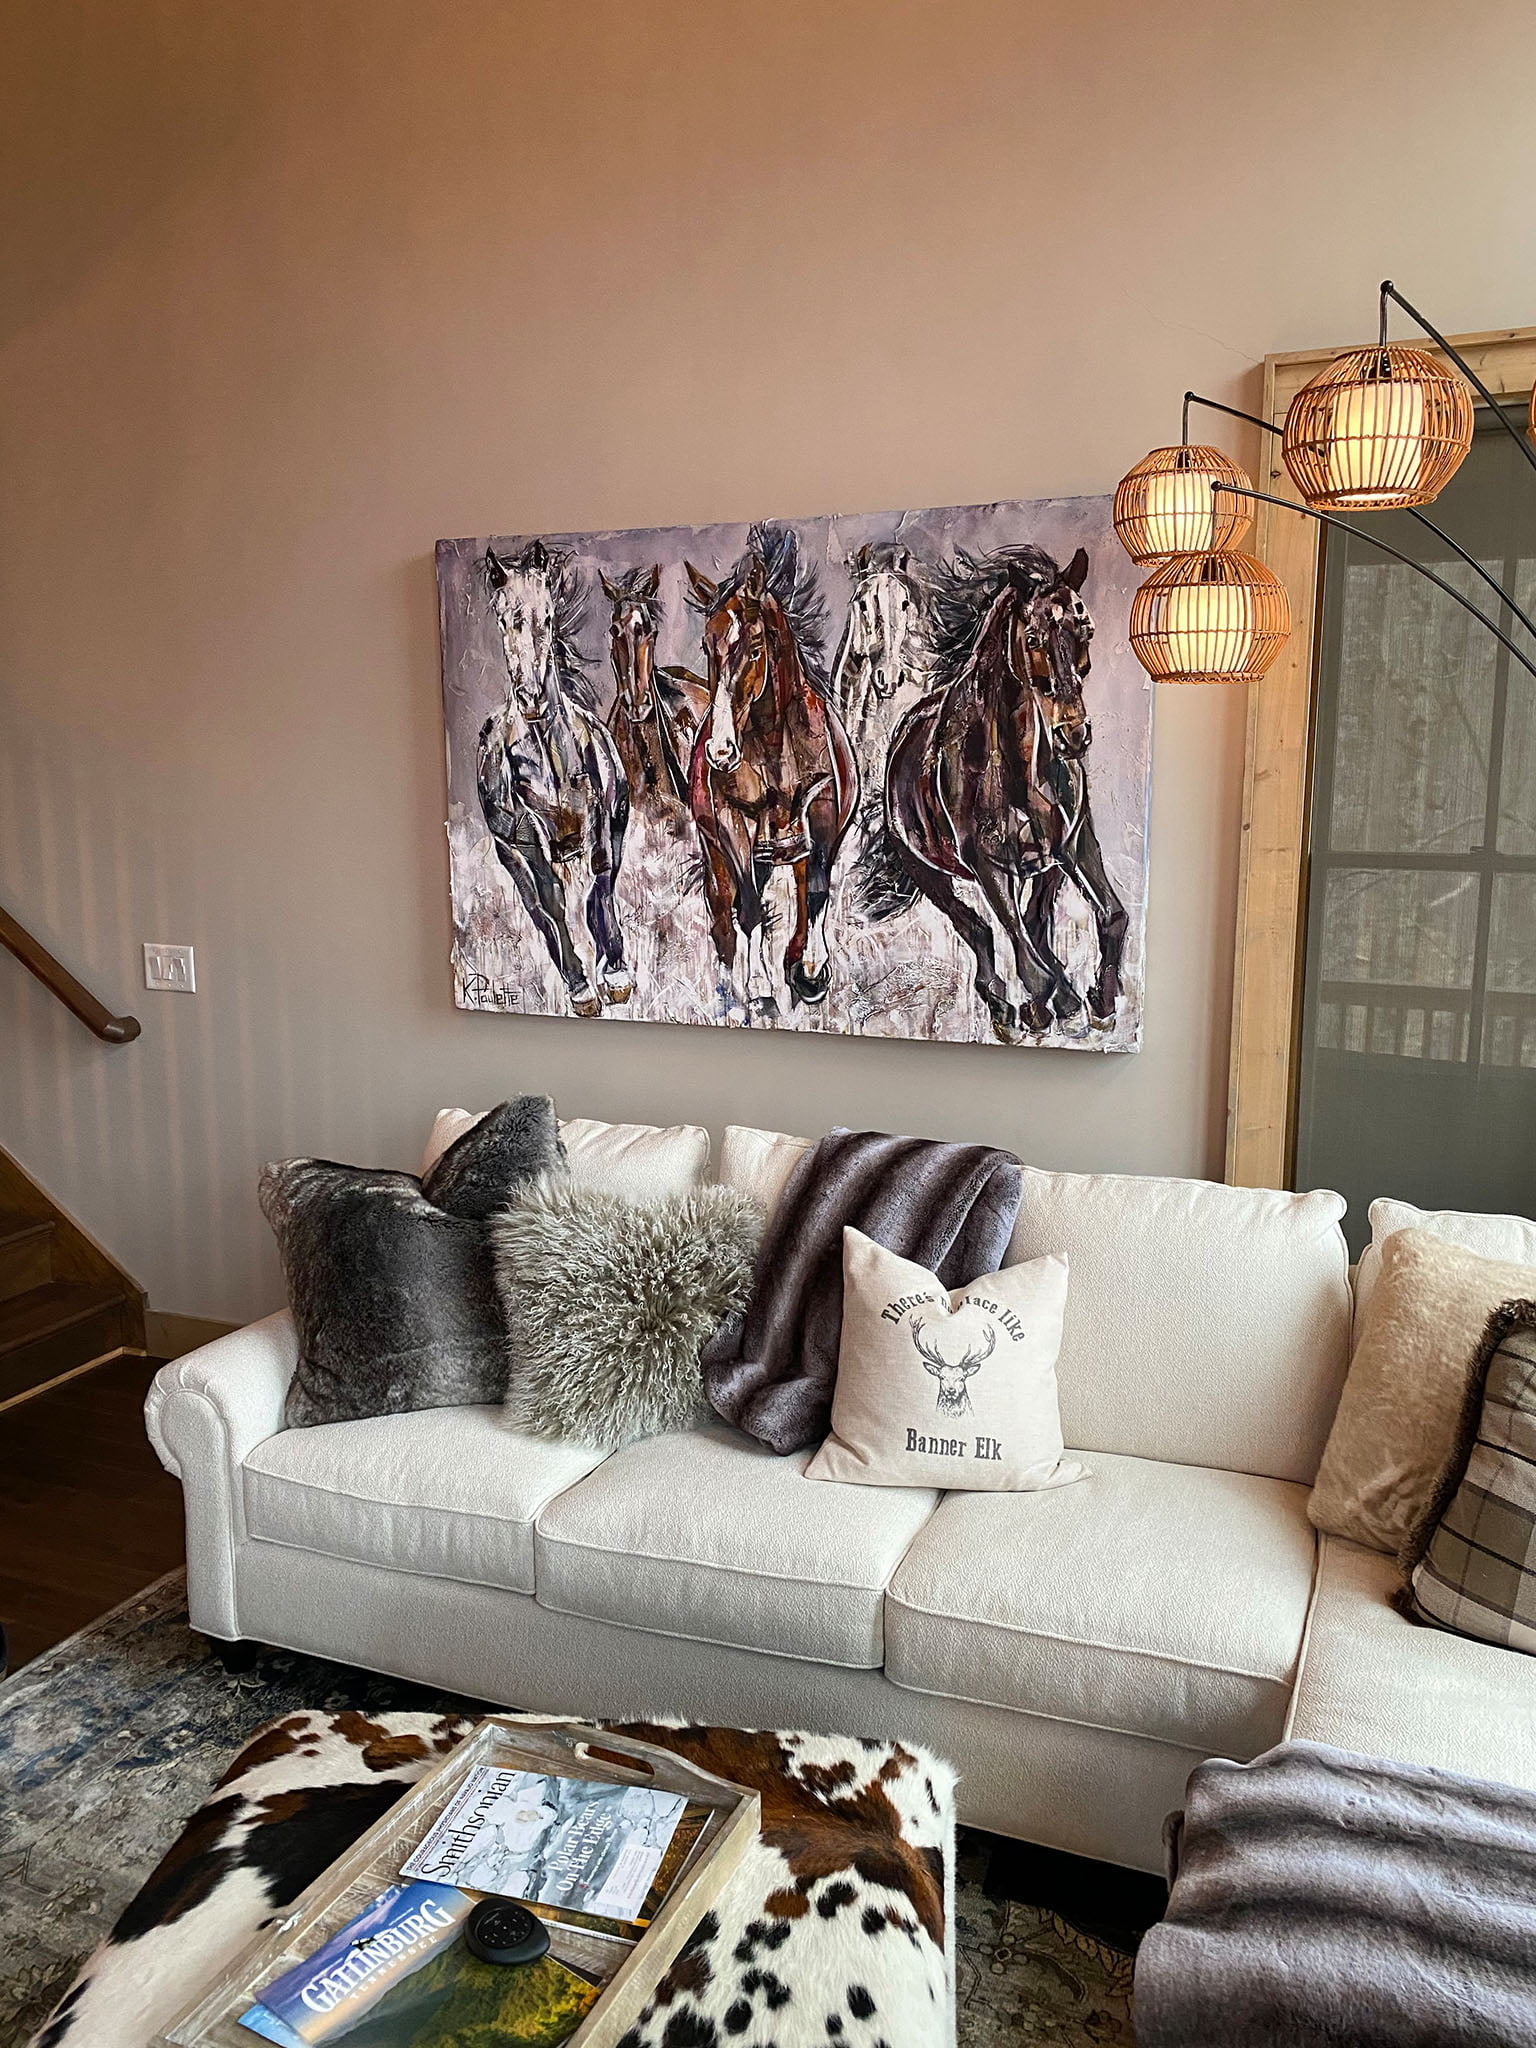 Banner Elk, NC art in a home at Eagles Nest. This horse painting is by Kent Paulette. This photo showcases interior design.